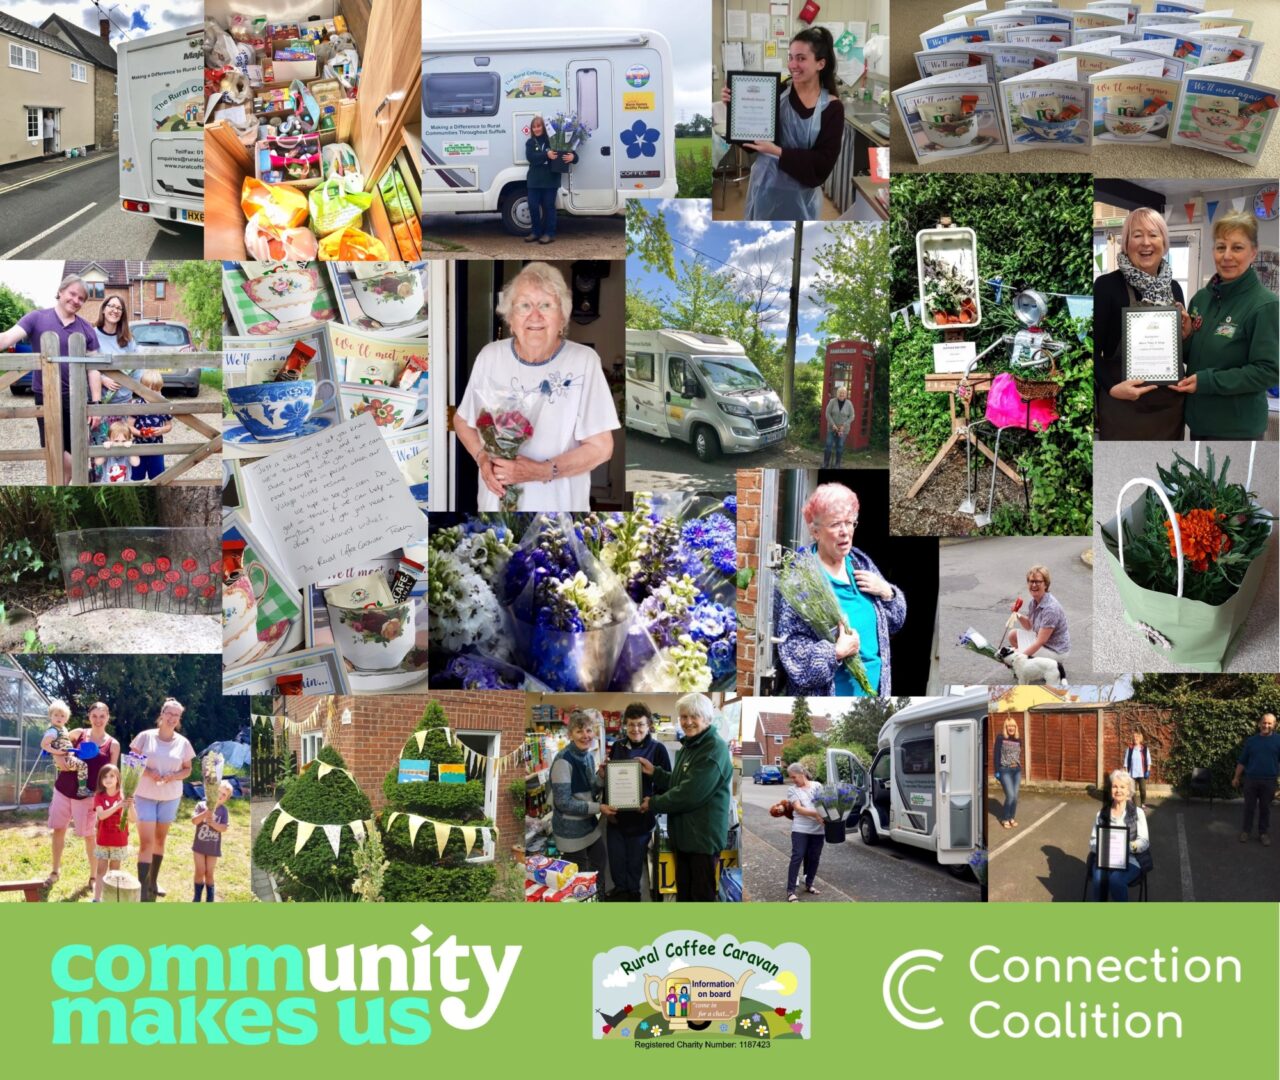 Collage of Rural Coffee Caravan Community Makes Us Connection Coalition photos with logos